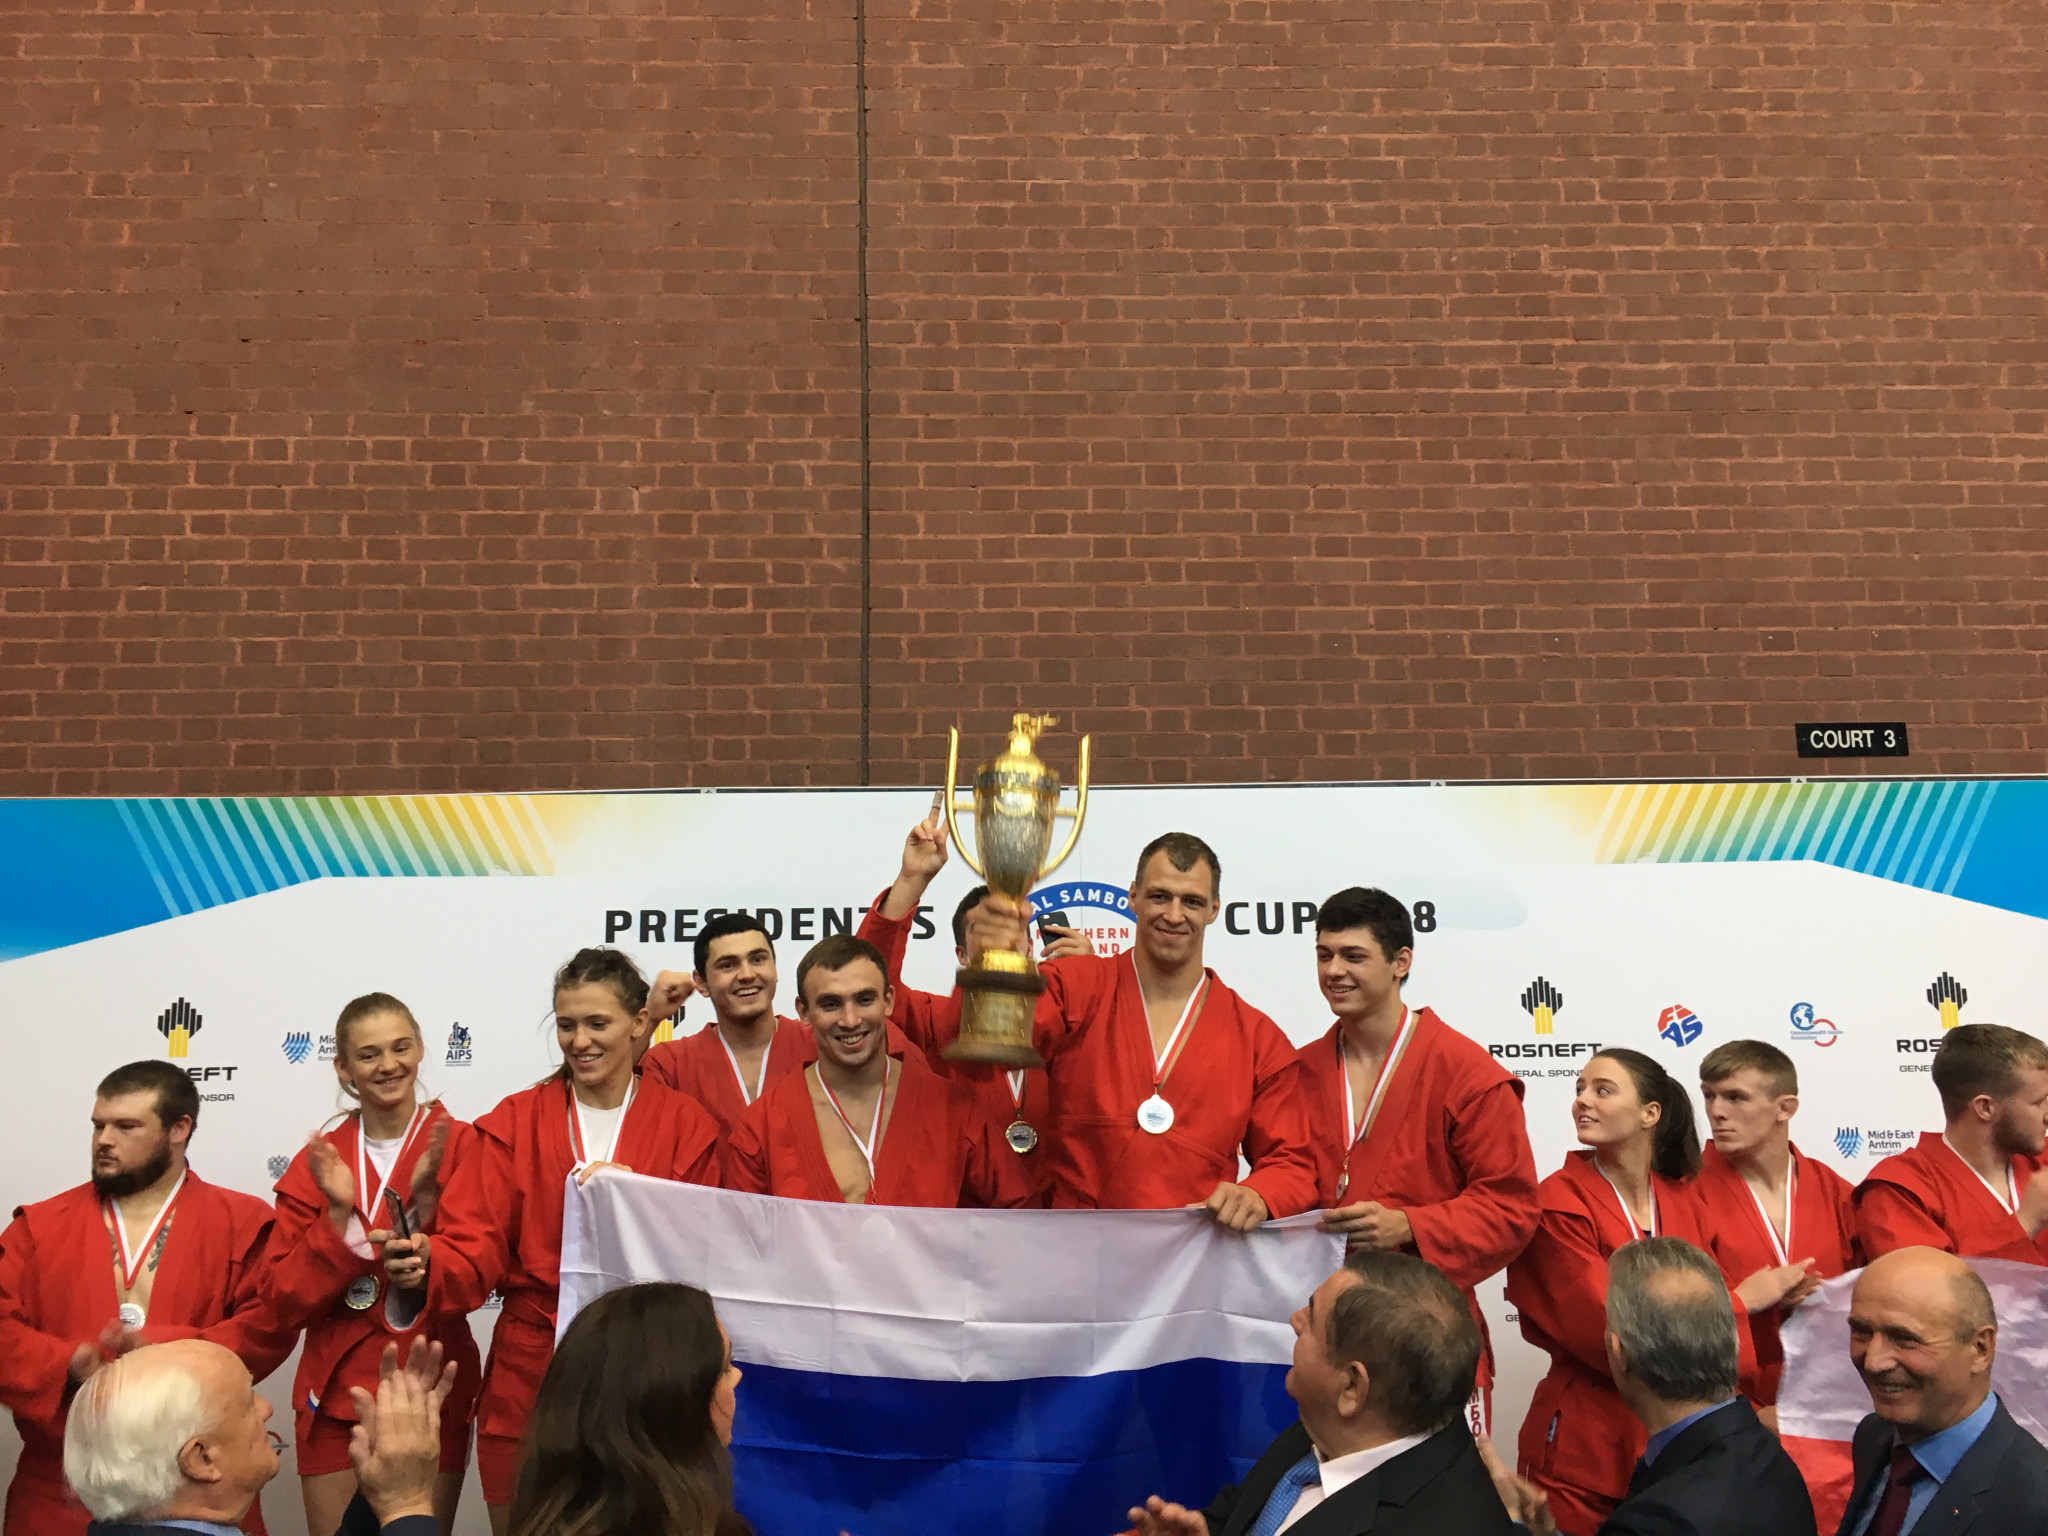 Russia won the Sambo President's Cup for the fifth time in a row today, beating the United States and Canada in the final ©ITG